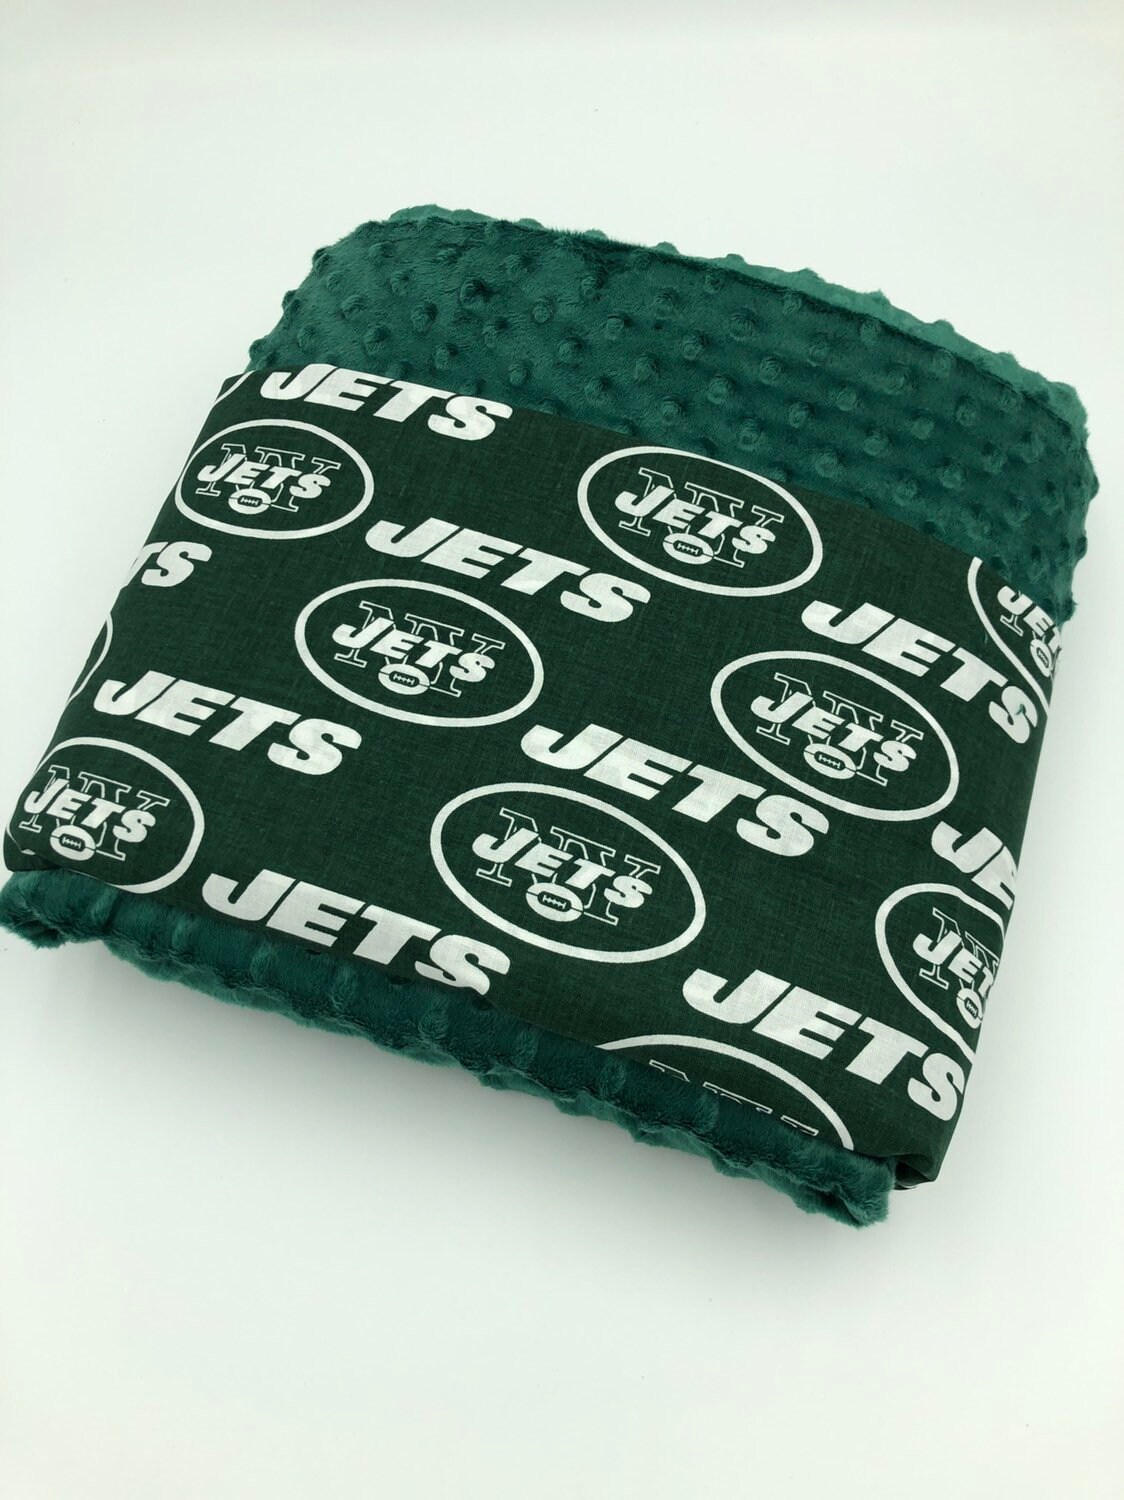 New York Jets Weighted Blanket, XL Weighted Blanket, Gift for him